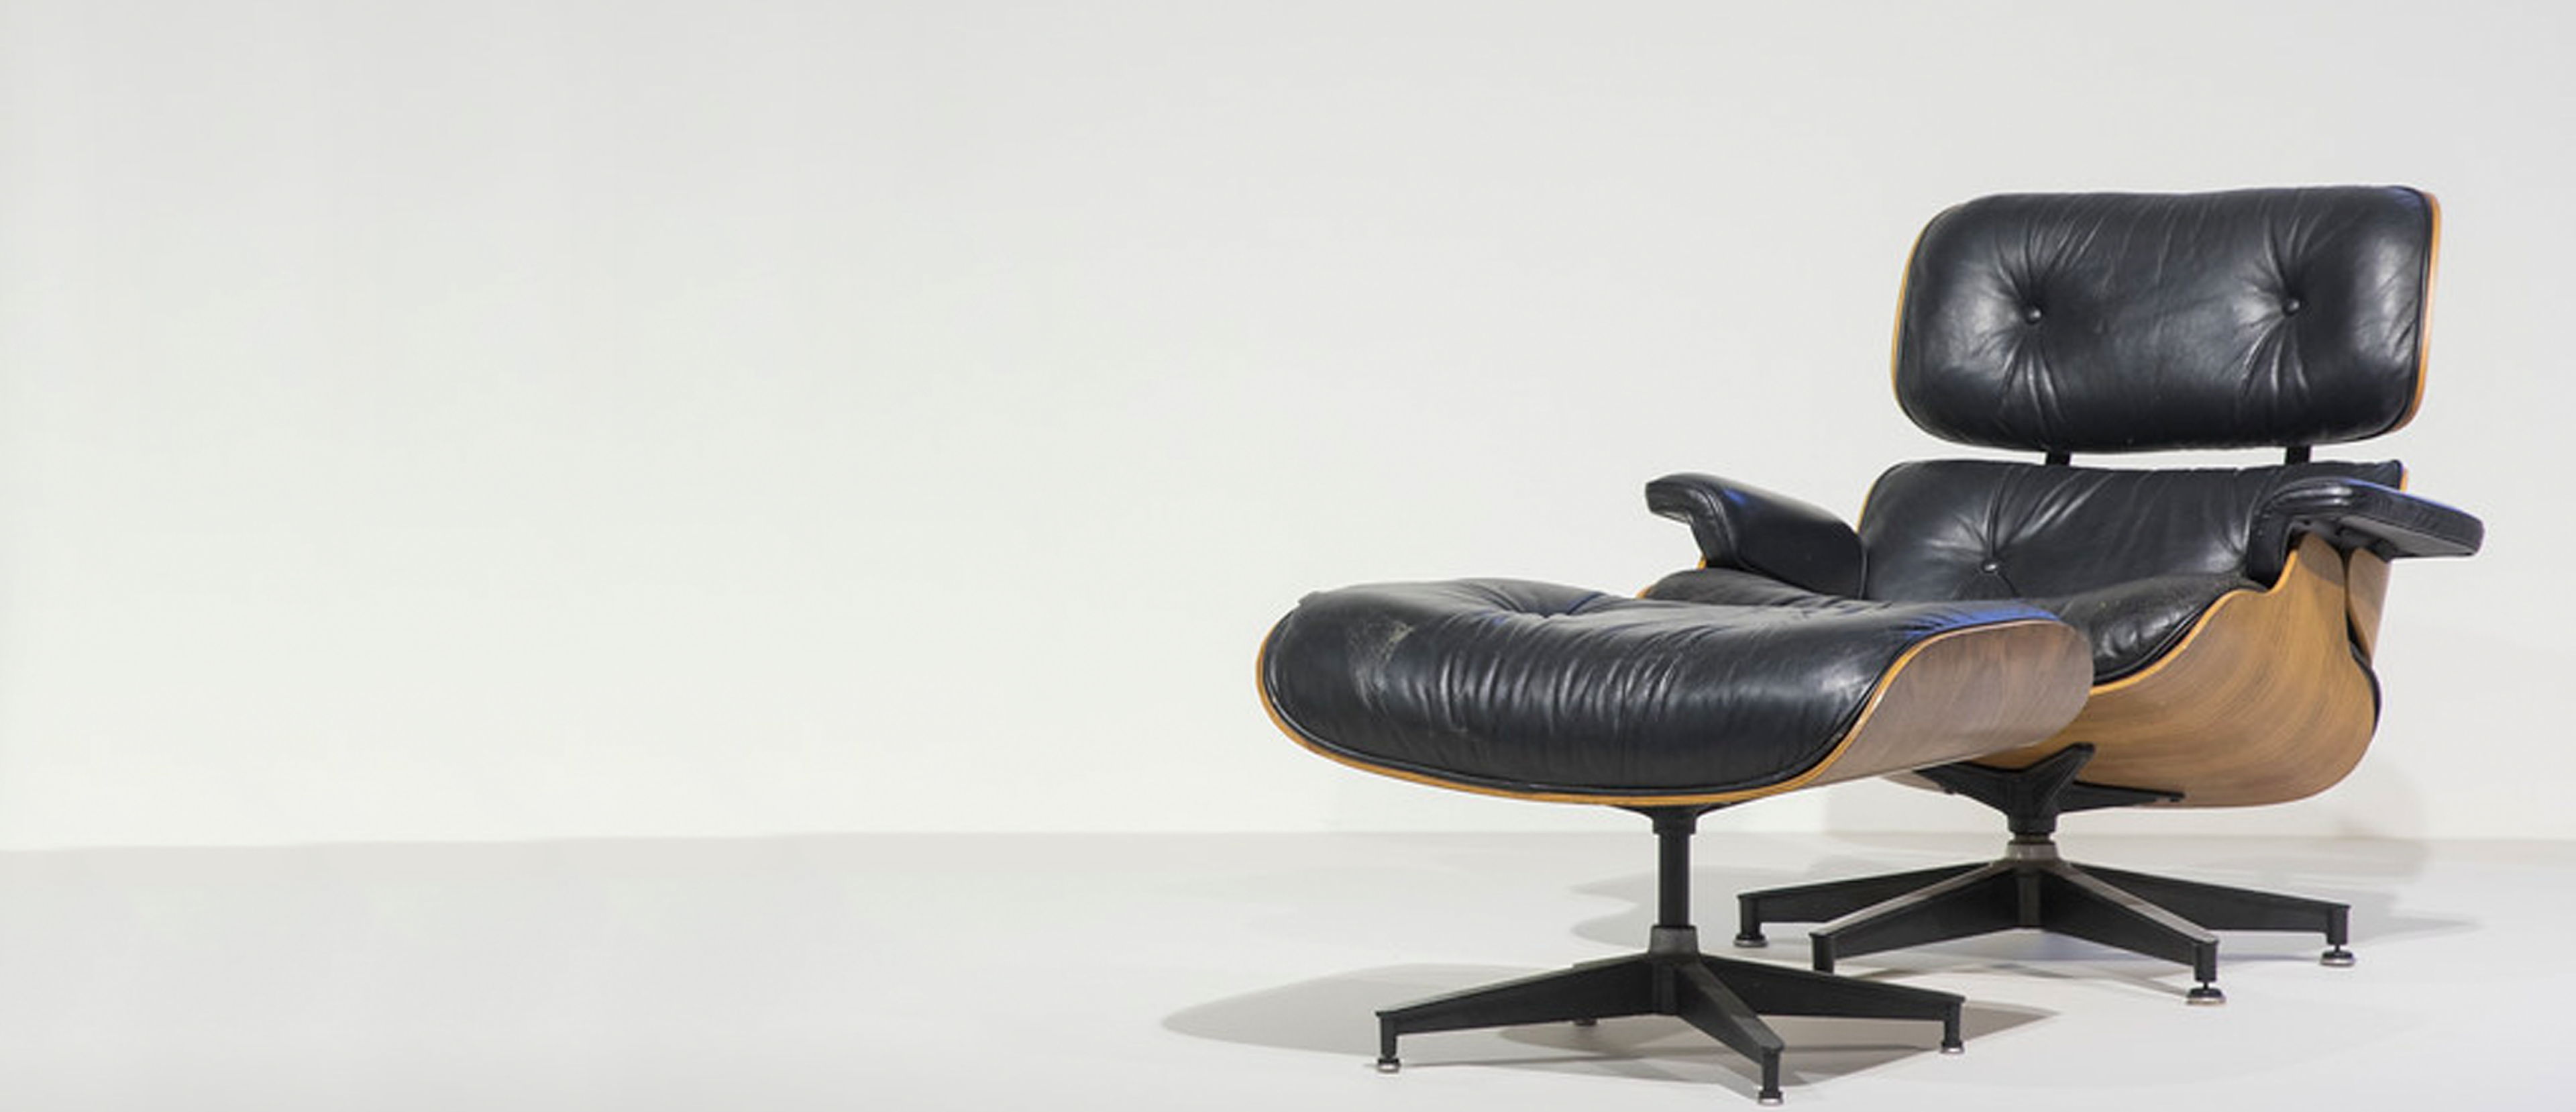 Eames Lounge Chair icon category image